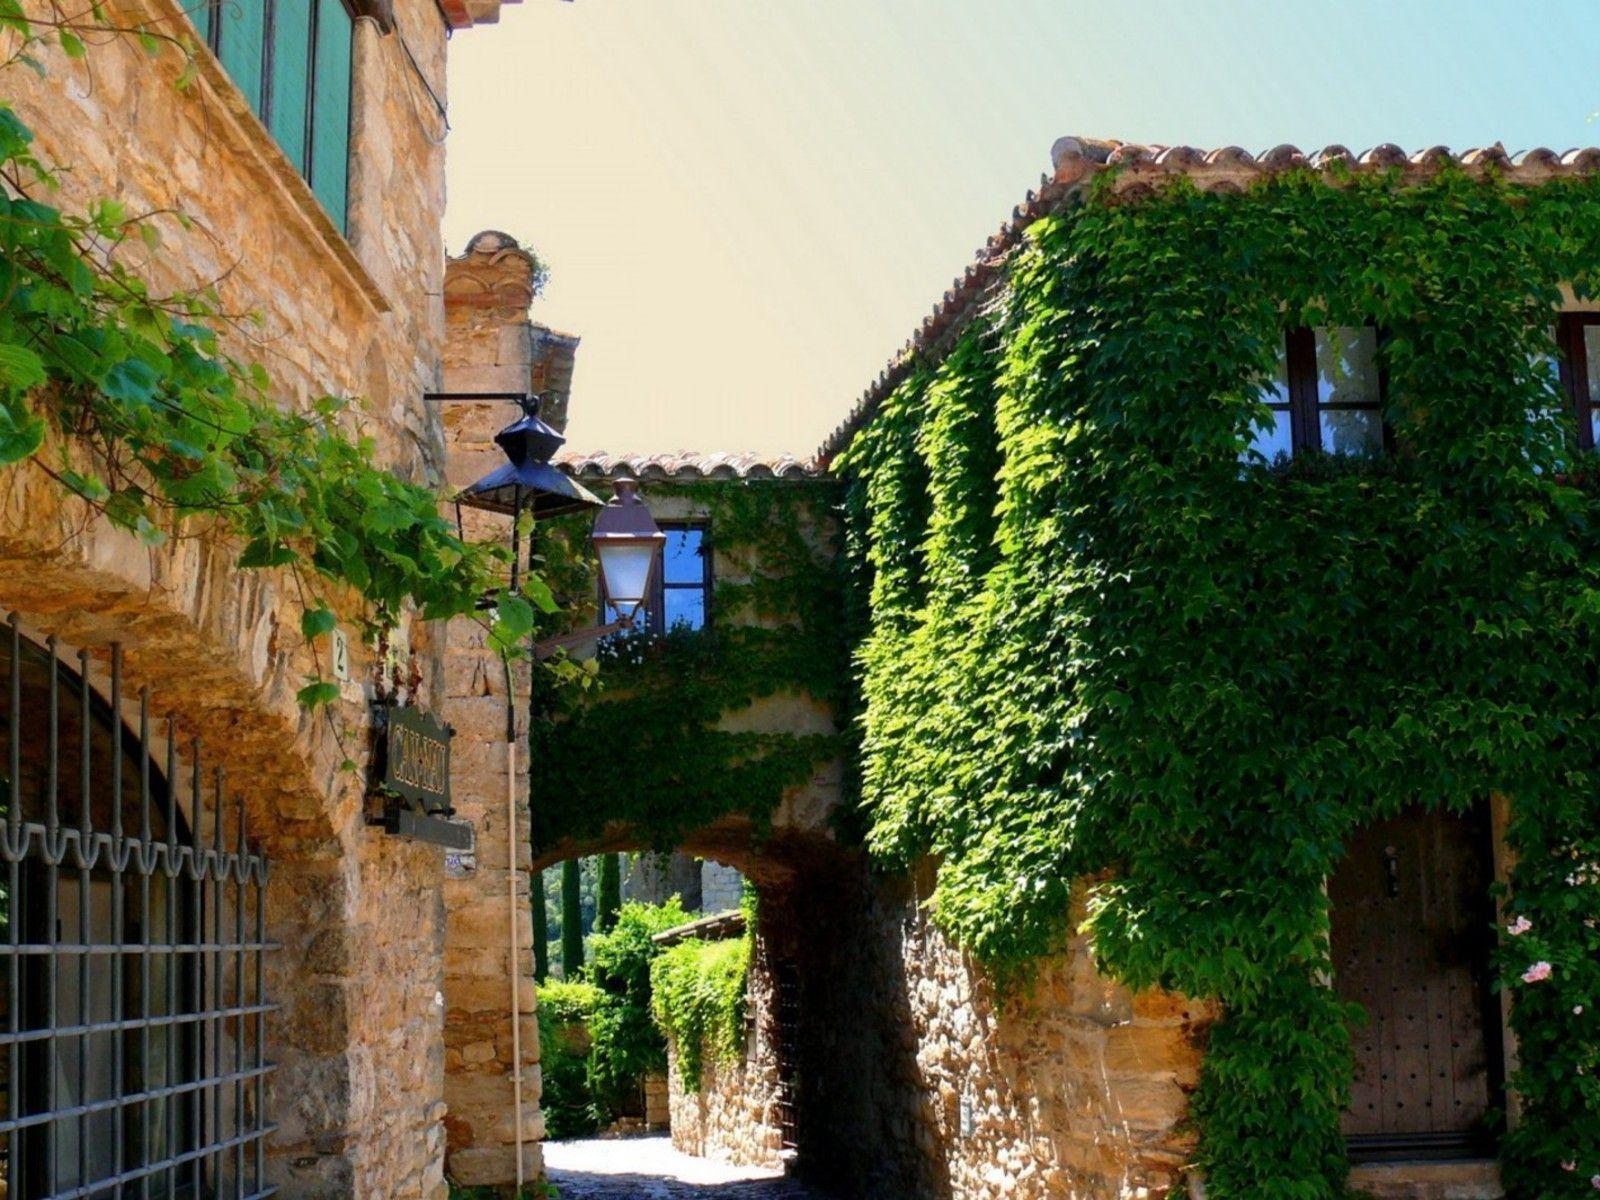 Ivy covered houses in catalonia spain wallpaper